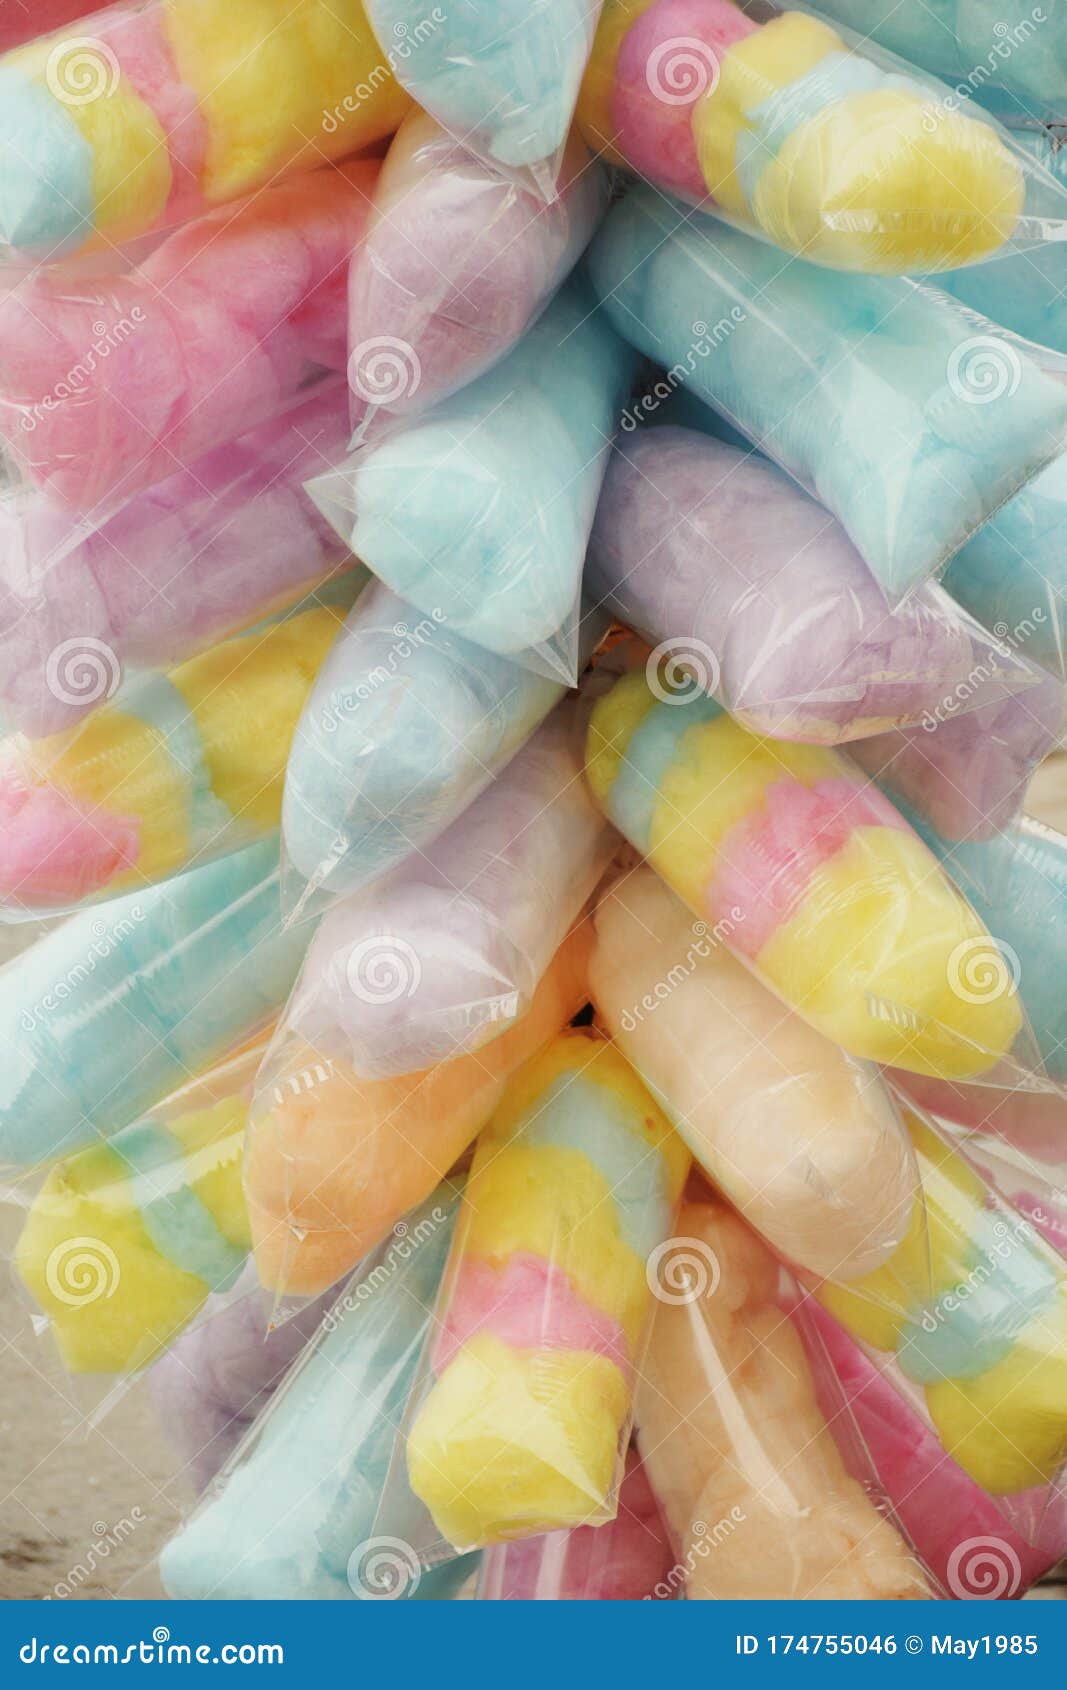 Colorful Sweet Cotton Candy in Plastic Package Stock Photo - Image of ...